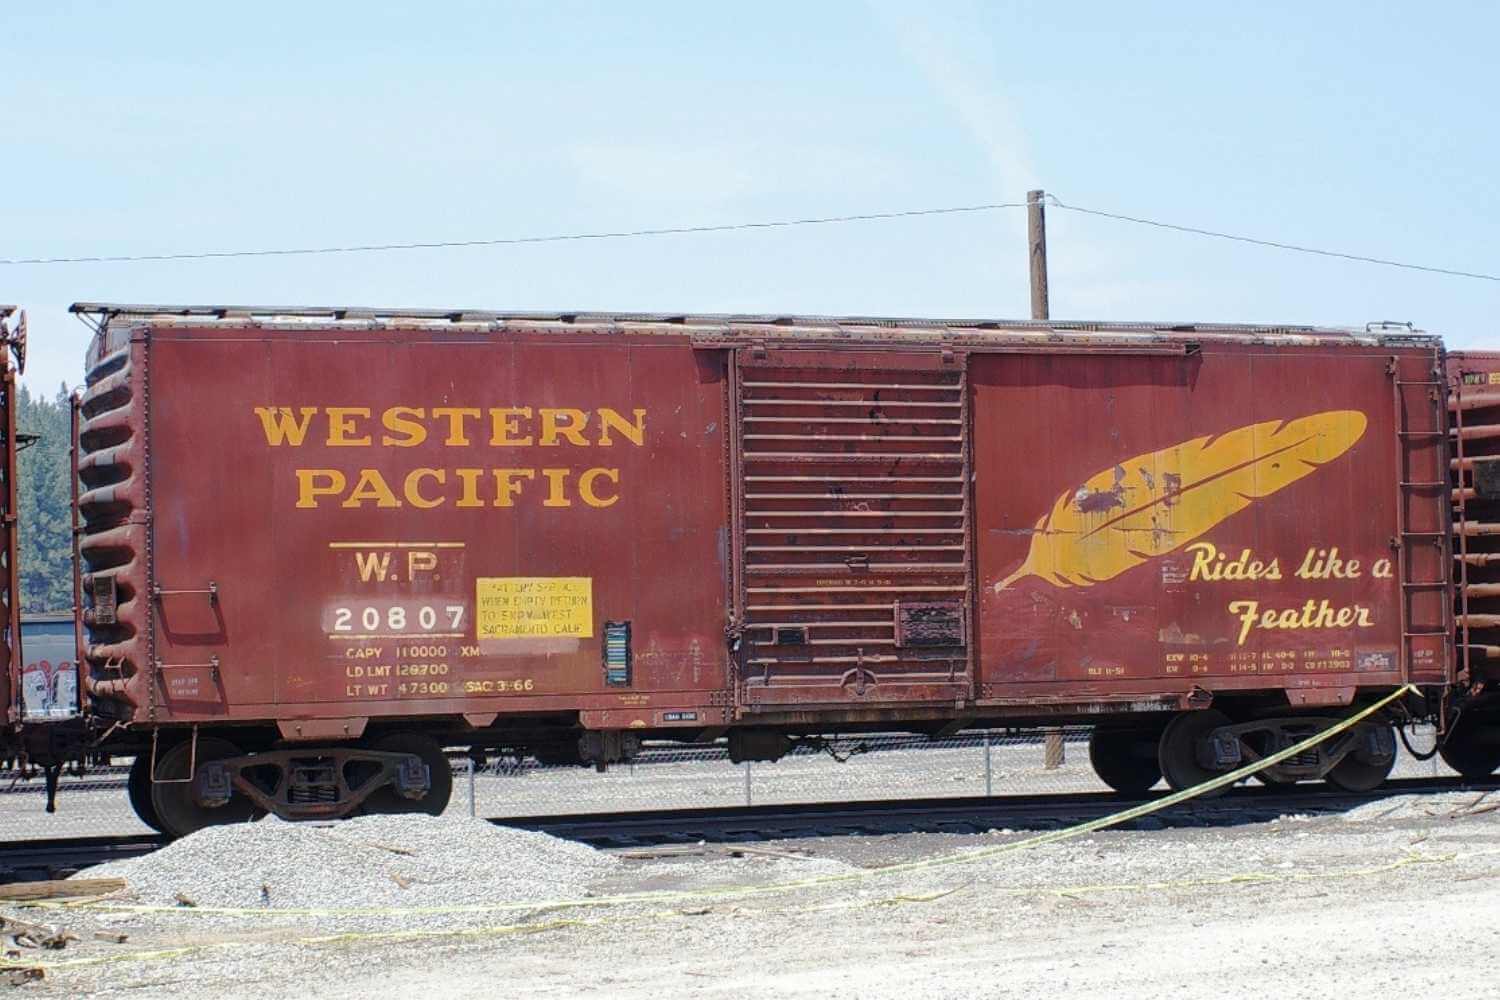 WP Train Car with slogan Rides Like a Feather